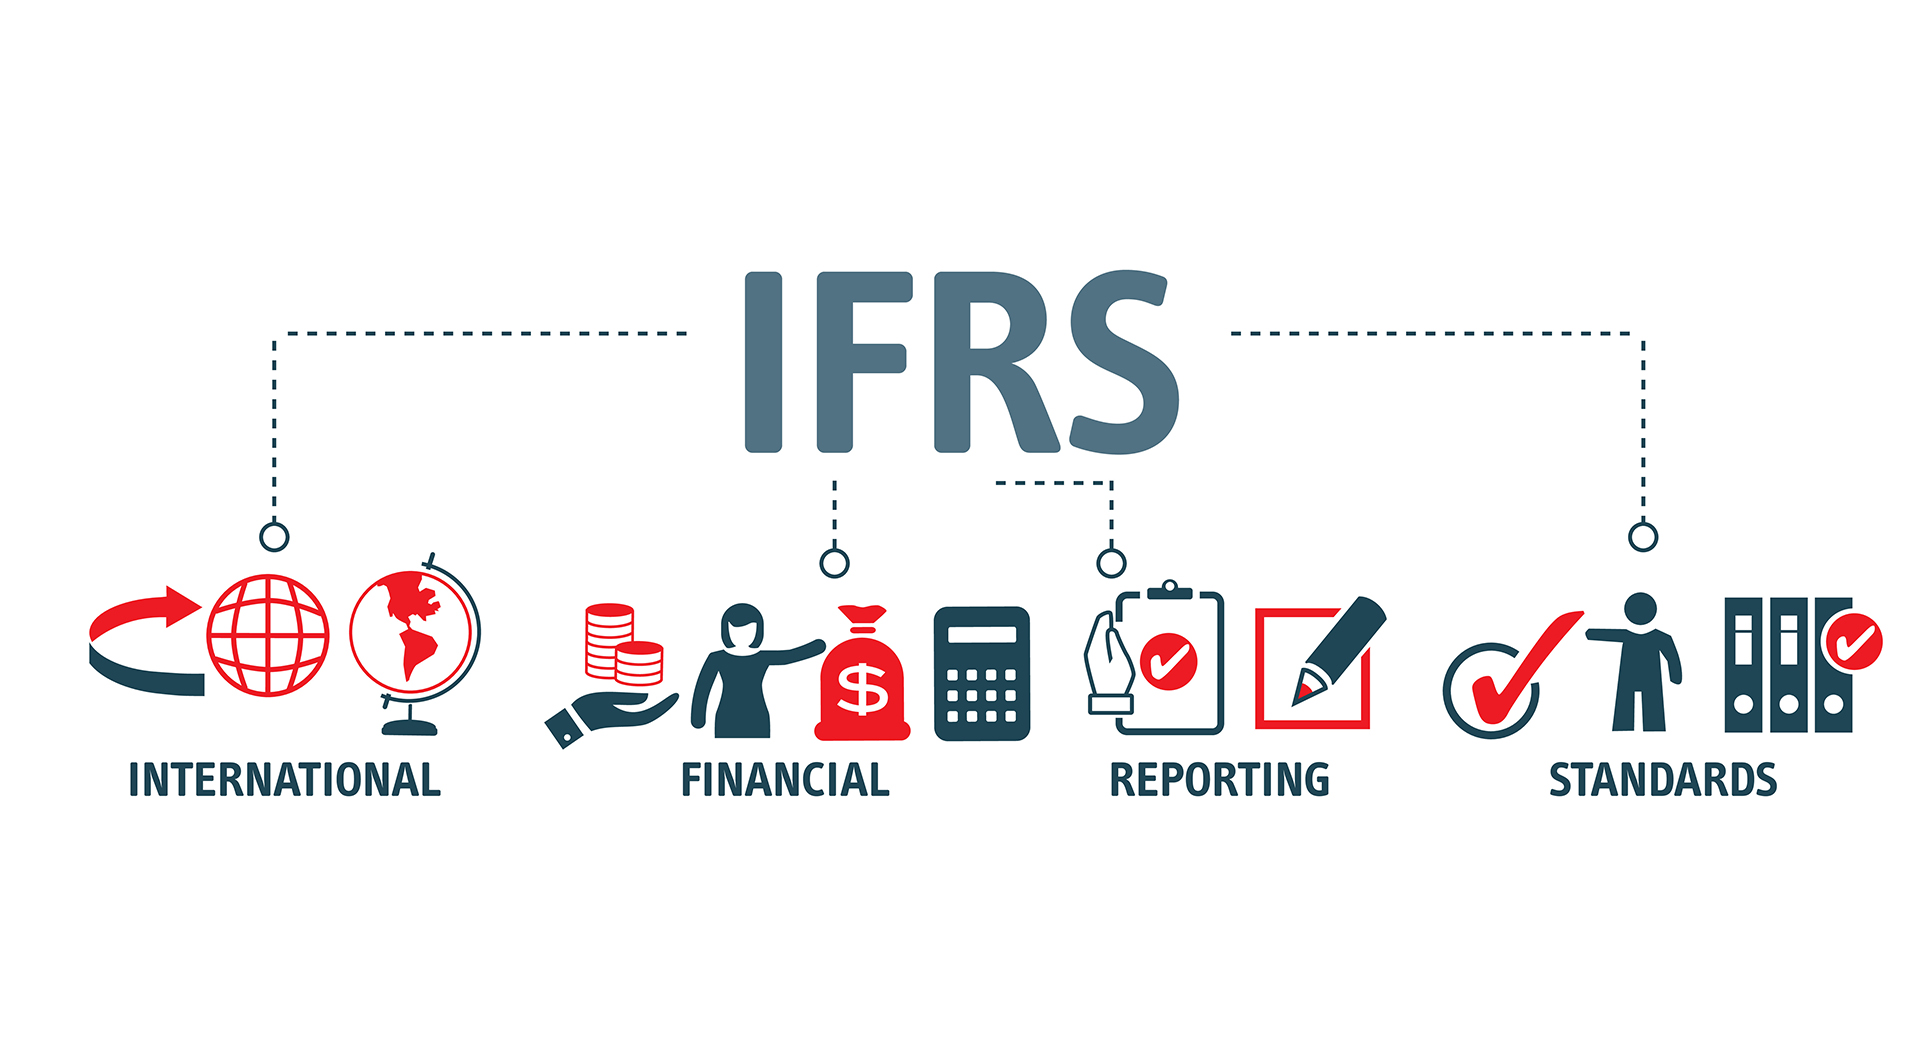 IFRS_281415902_1920